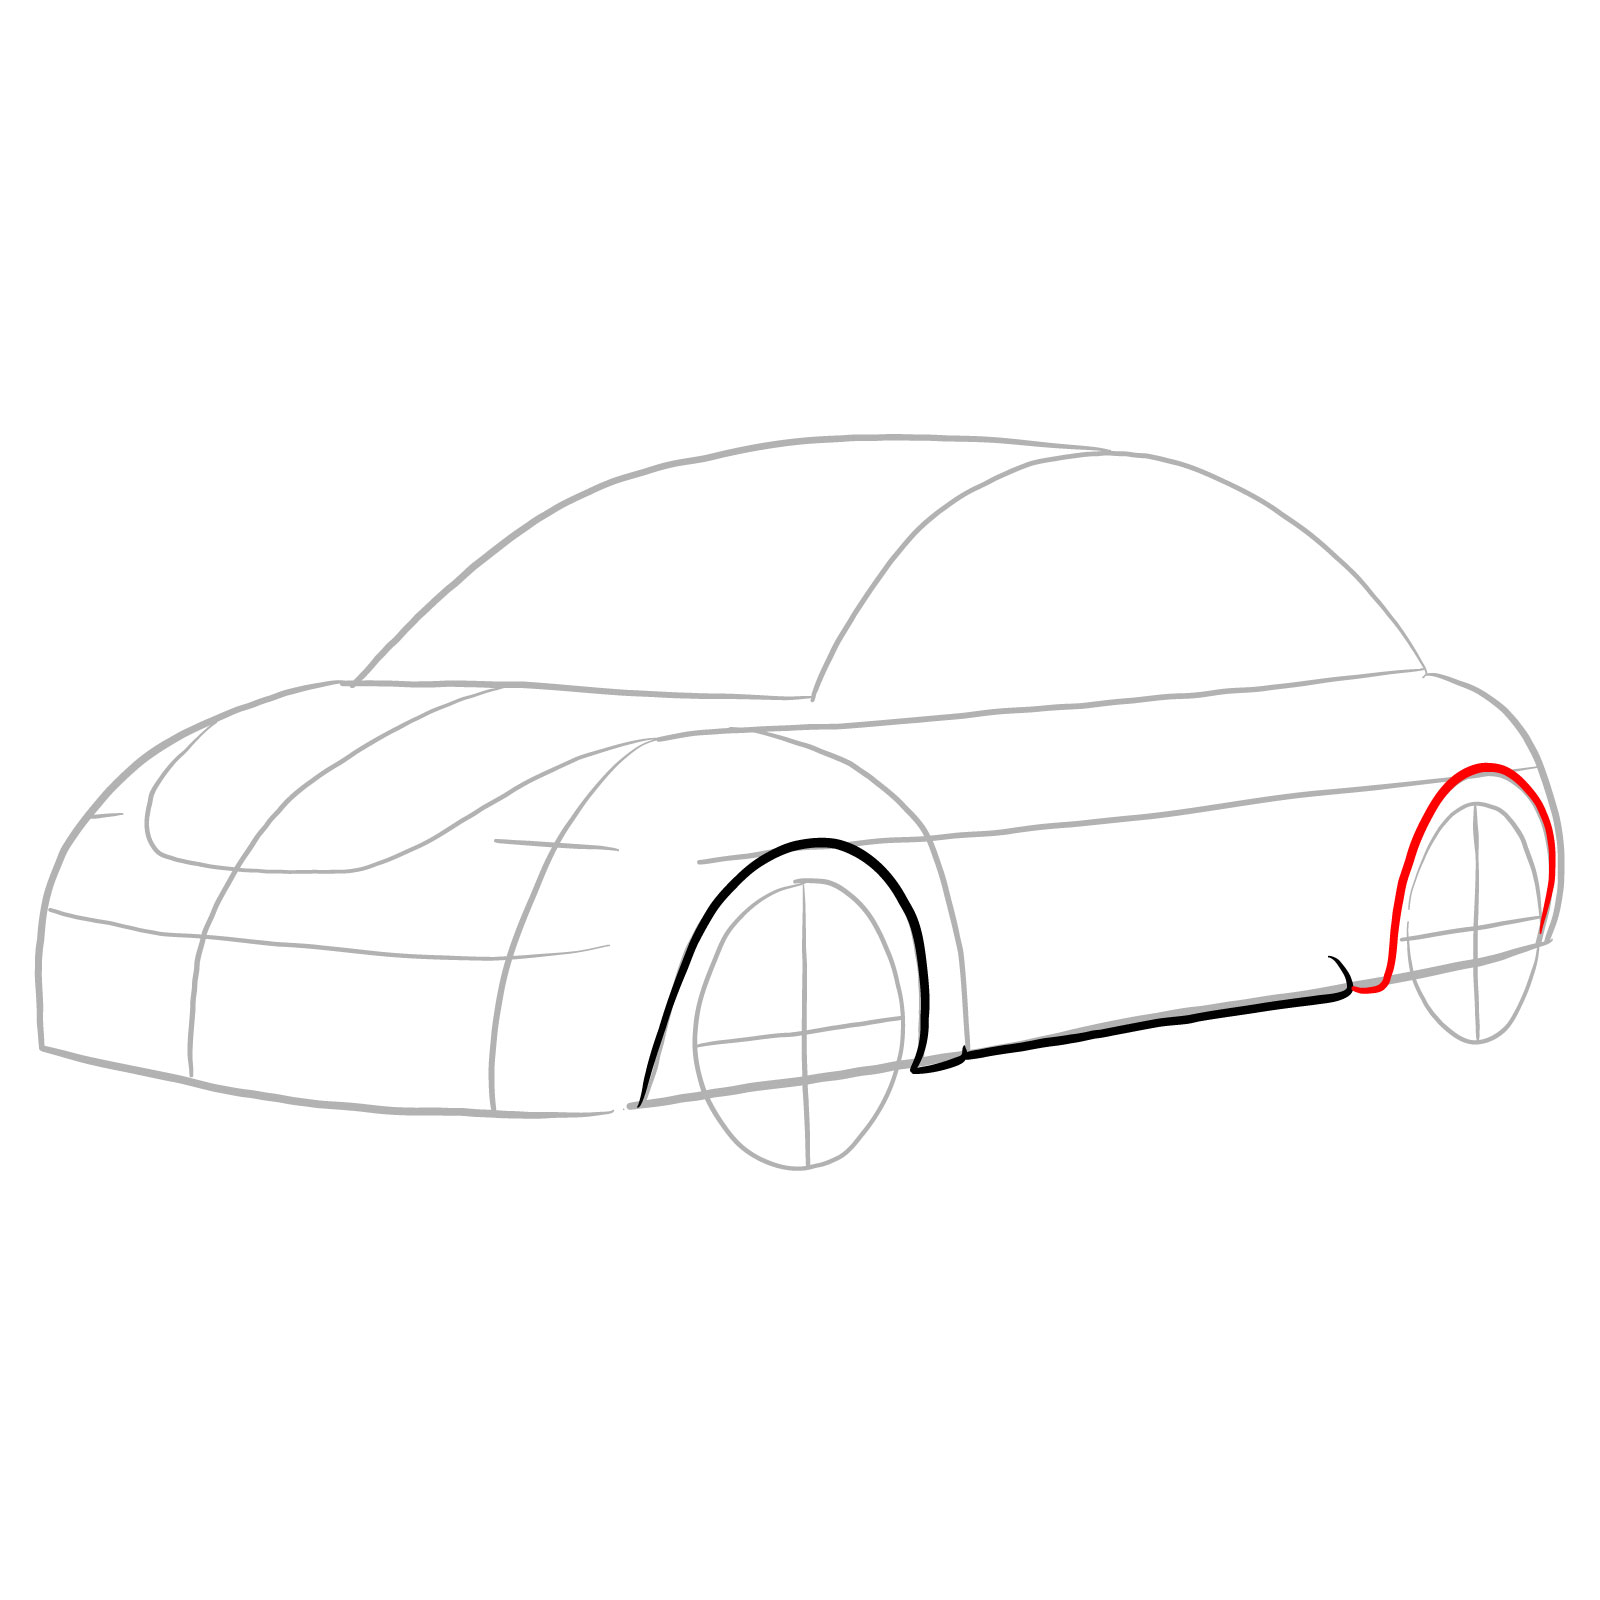 How to draw Volkswagen New Beetle - step 06